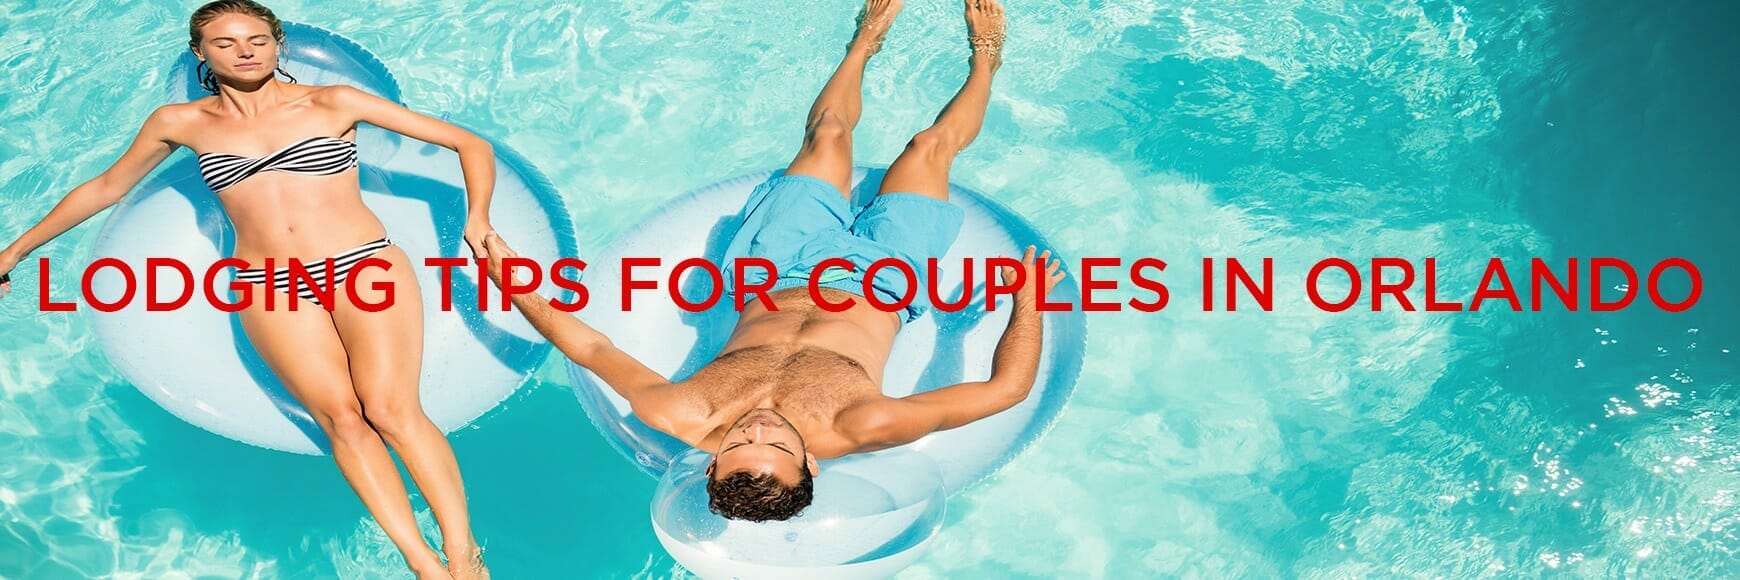 Lodging-tips-for-couples-in-Orlando---orlando-vacation